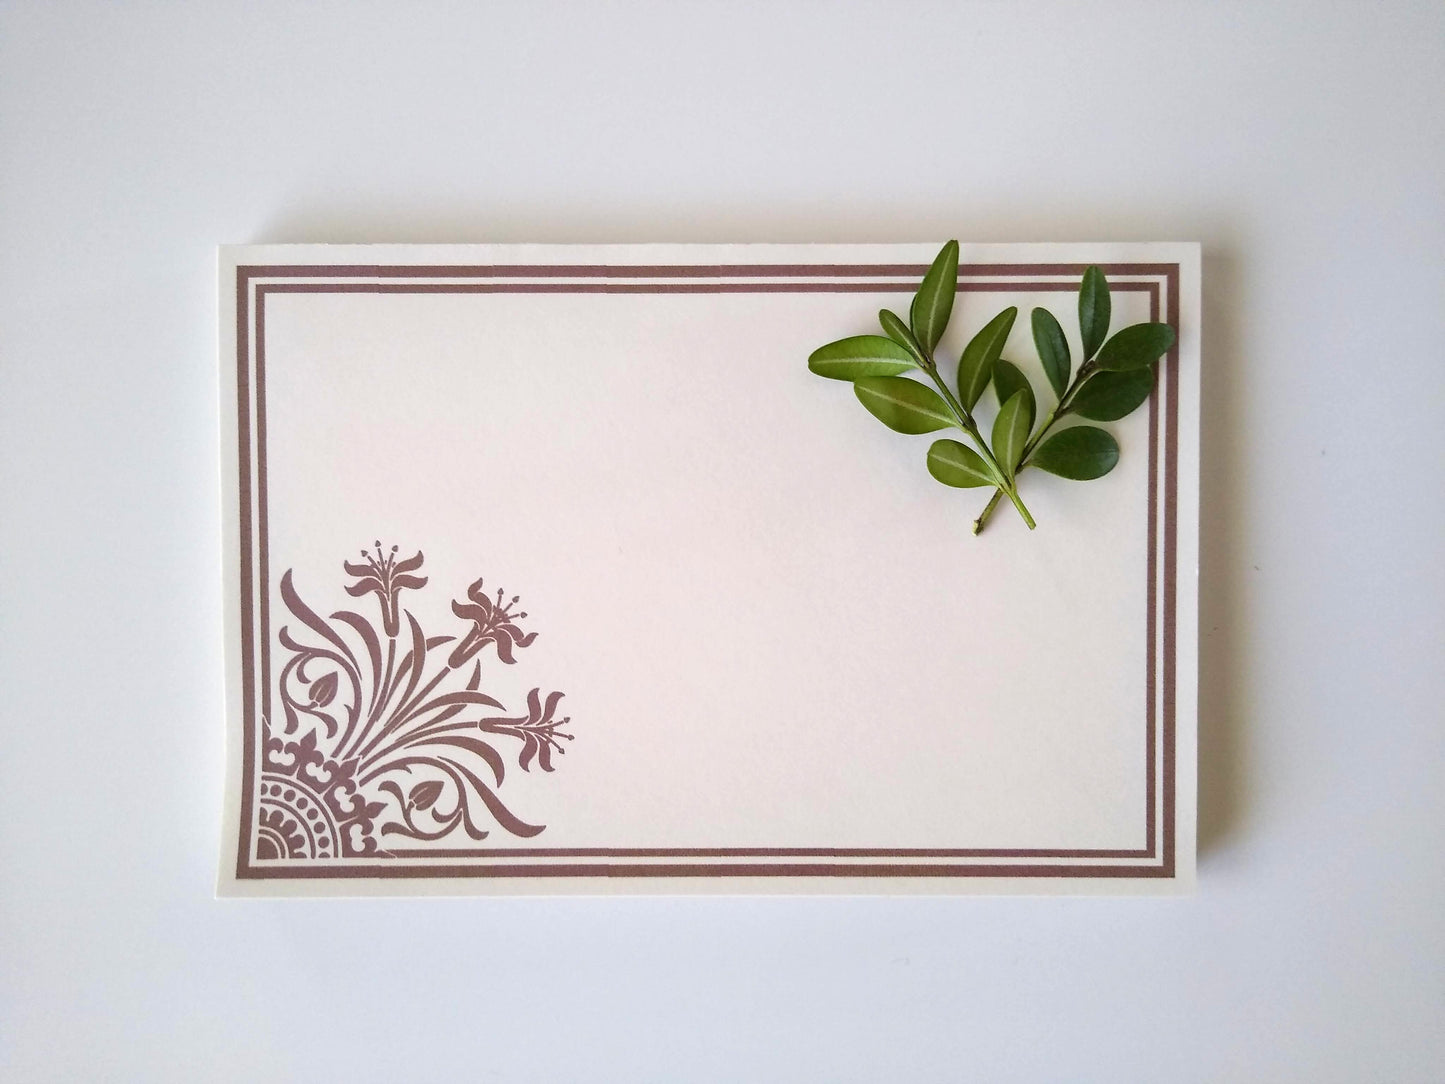 Single notepad with a stylized lily design in the lower left corner. There is a double line border around the whole notepad. Two small sprigs of leaves rest on the upper right hand corner.